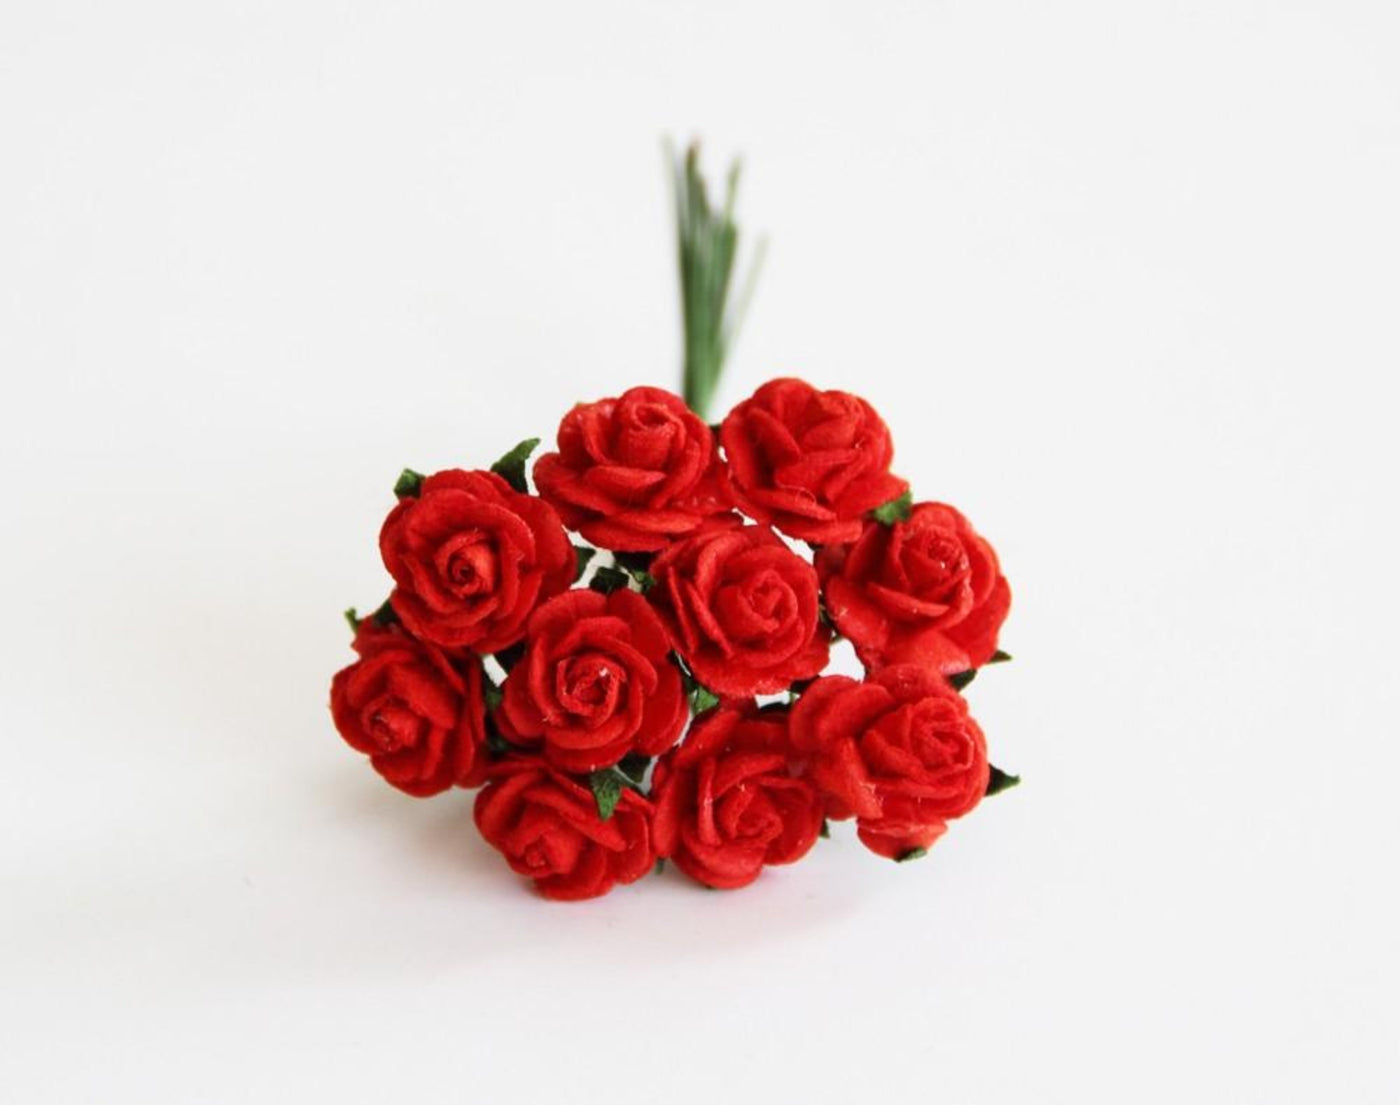 10 Pcs / 100 Pcs Mulberry Paper Flowers - 1cm Rounded Petal Roses - Red